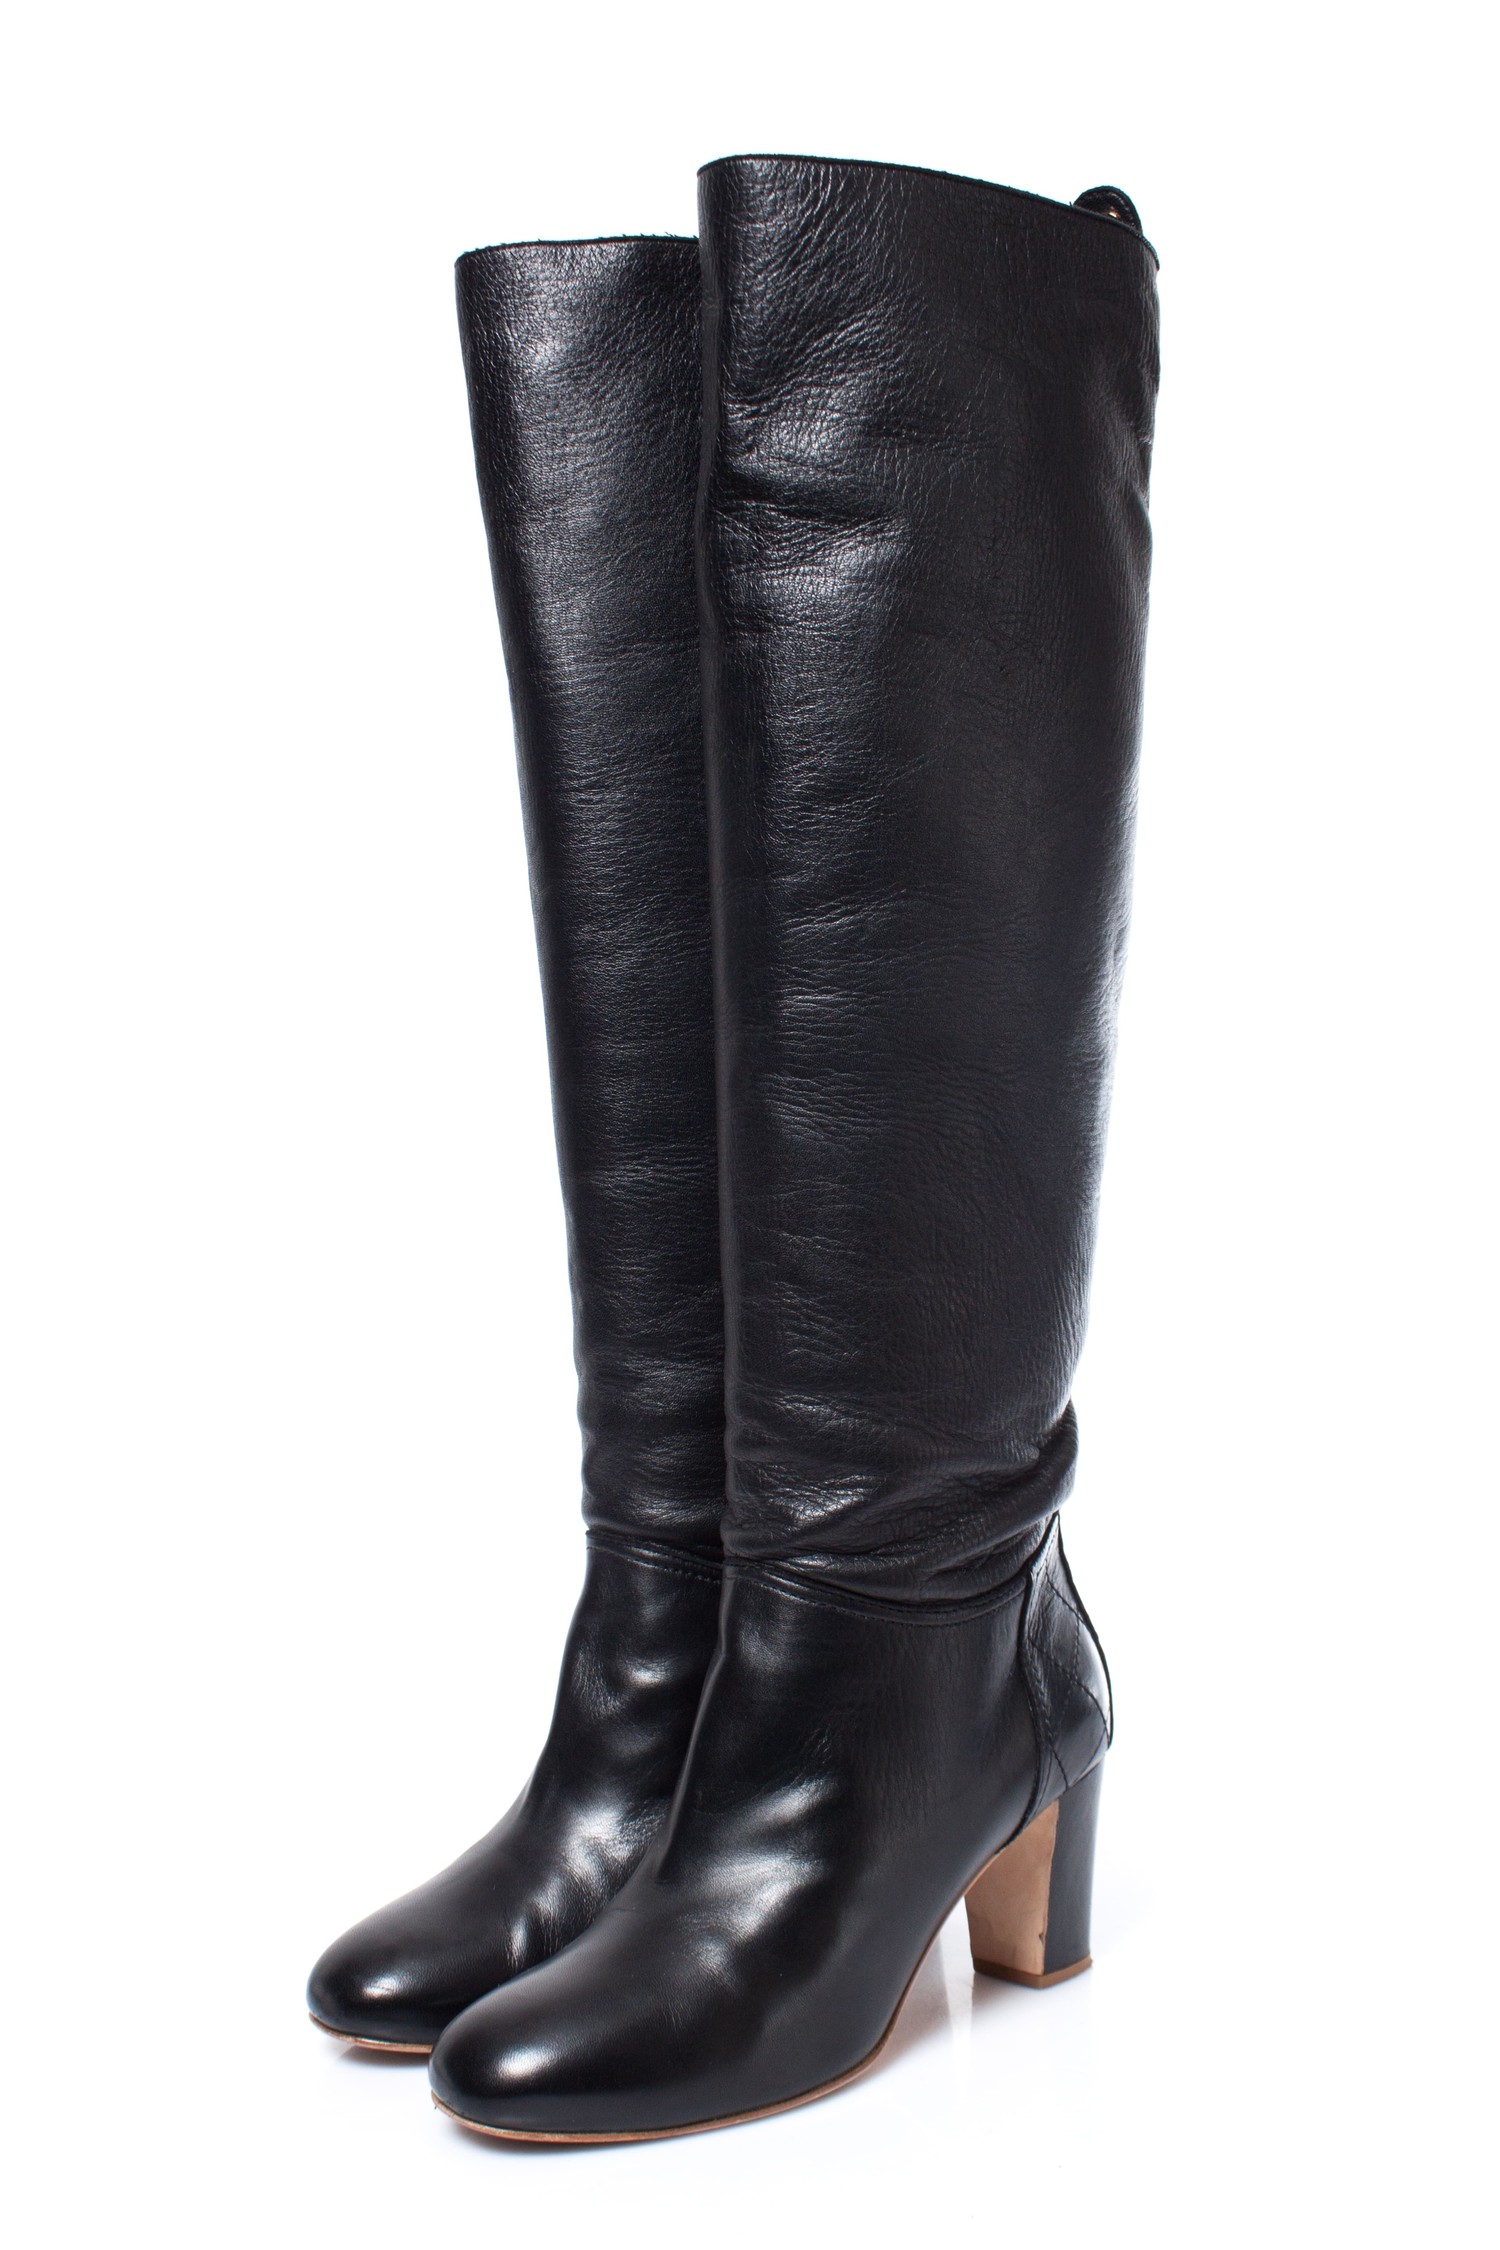 Chanel, Black heeled leather boots 